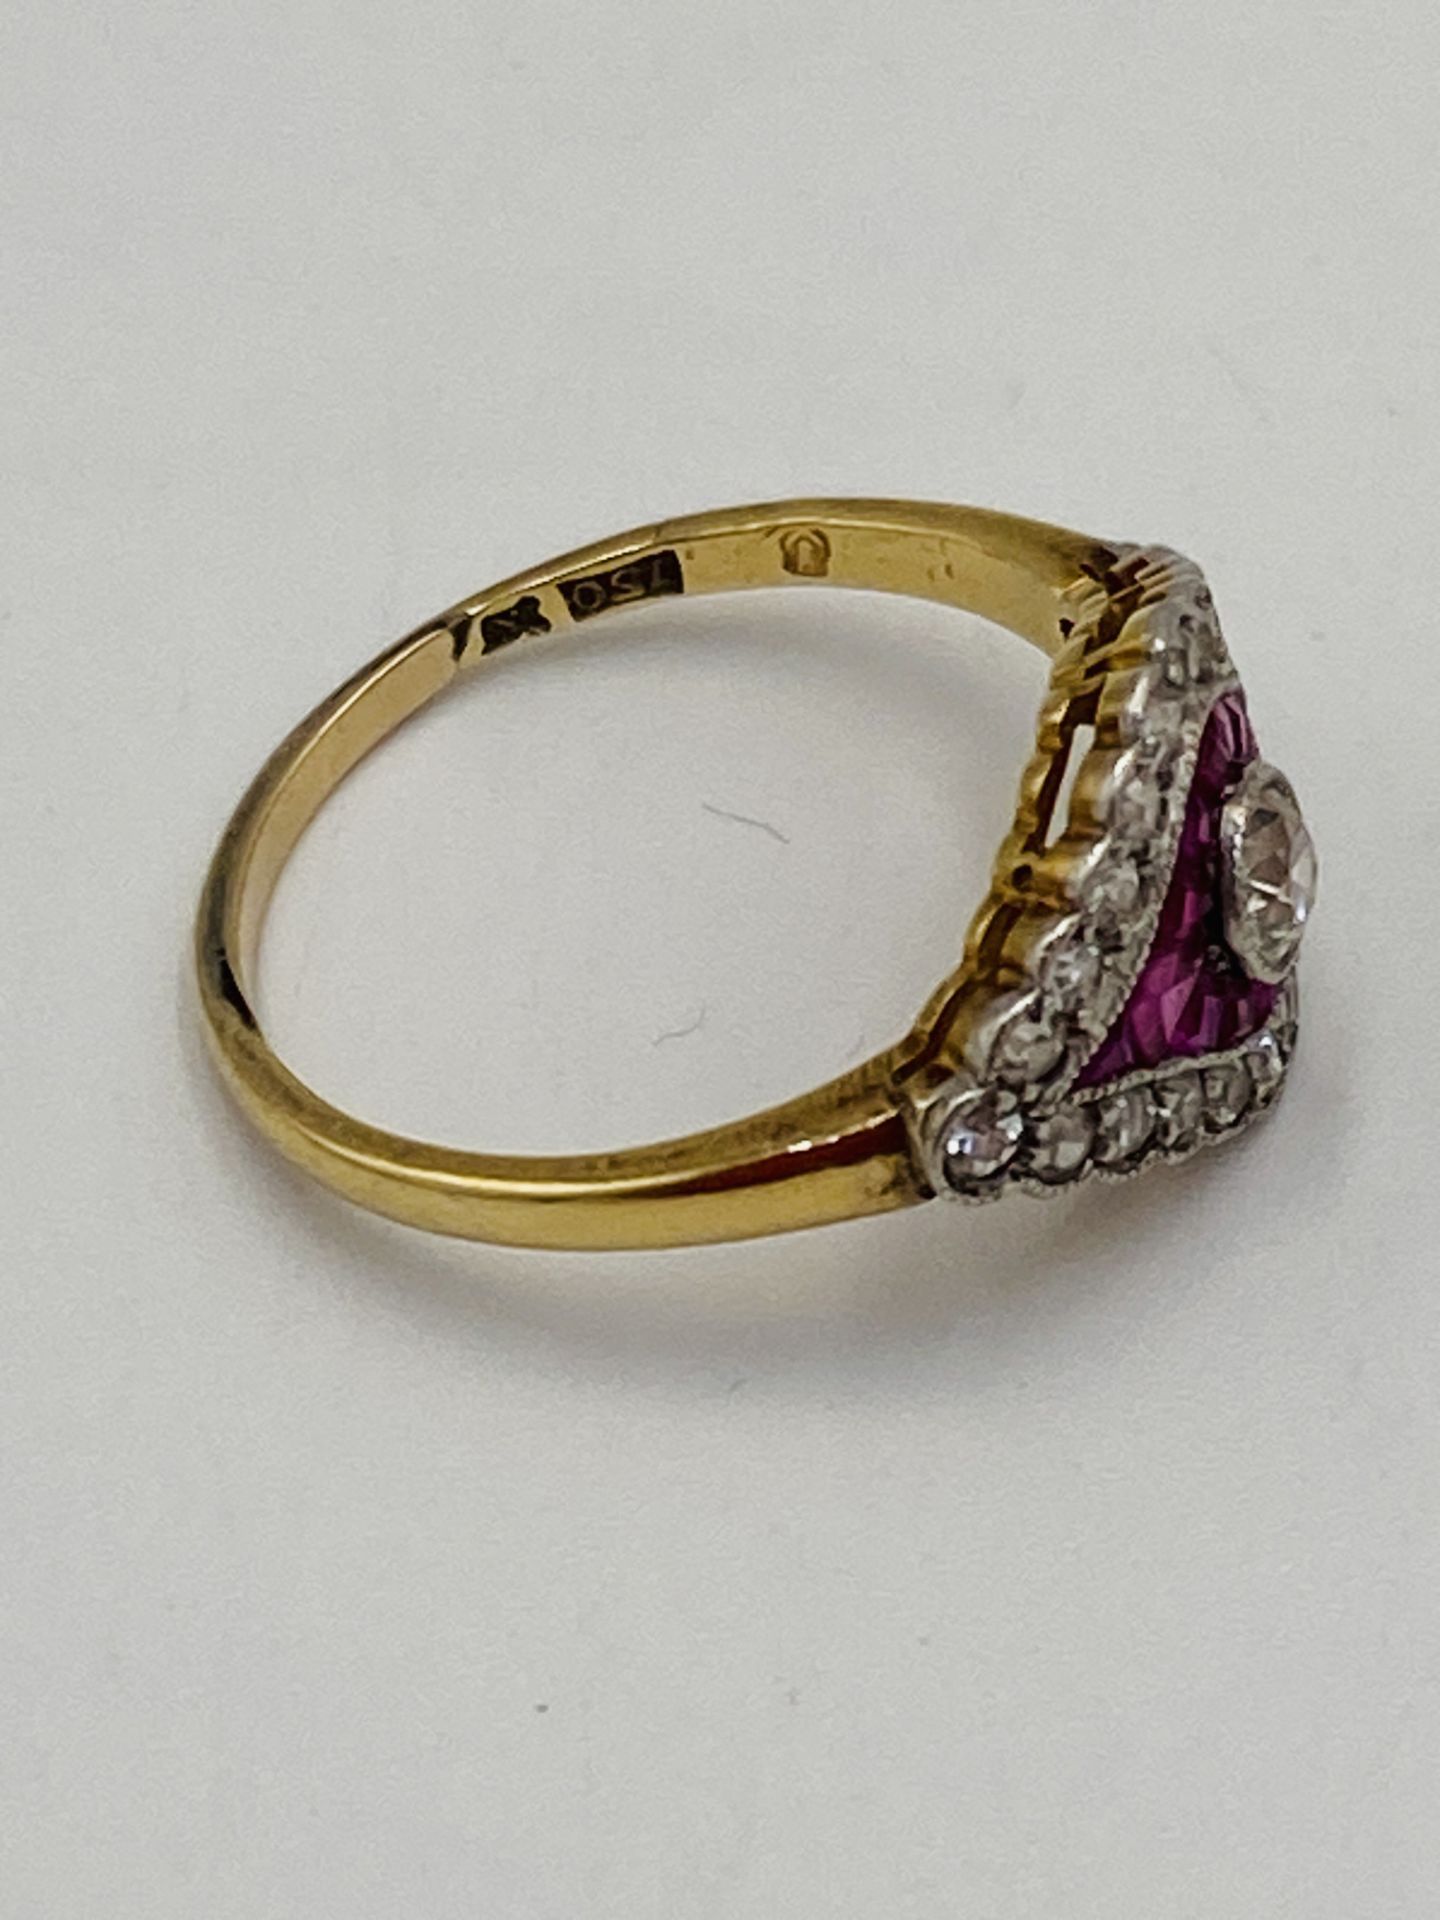 18ct gold ring set with central diamond - Image 2 of 6